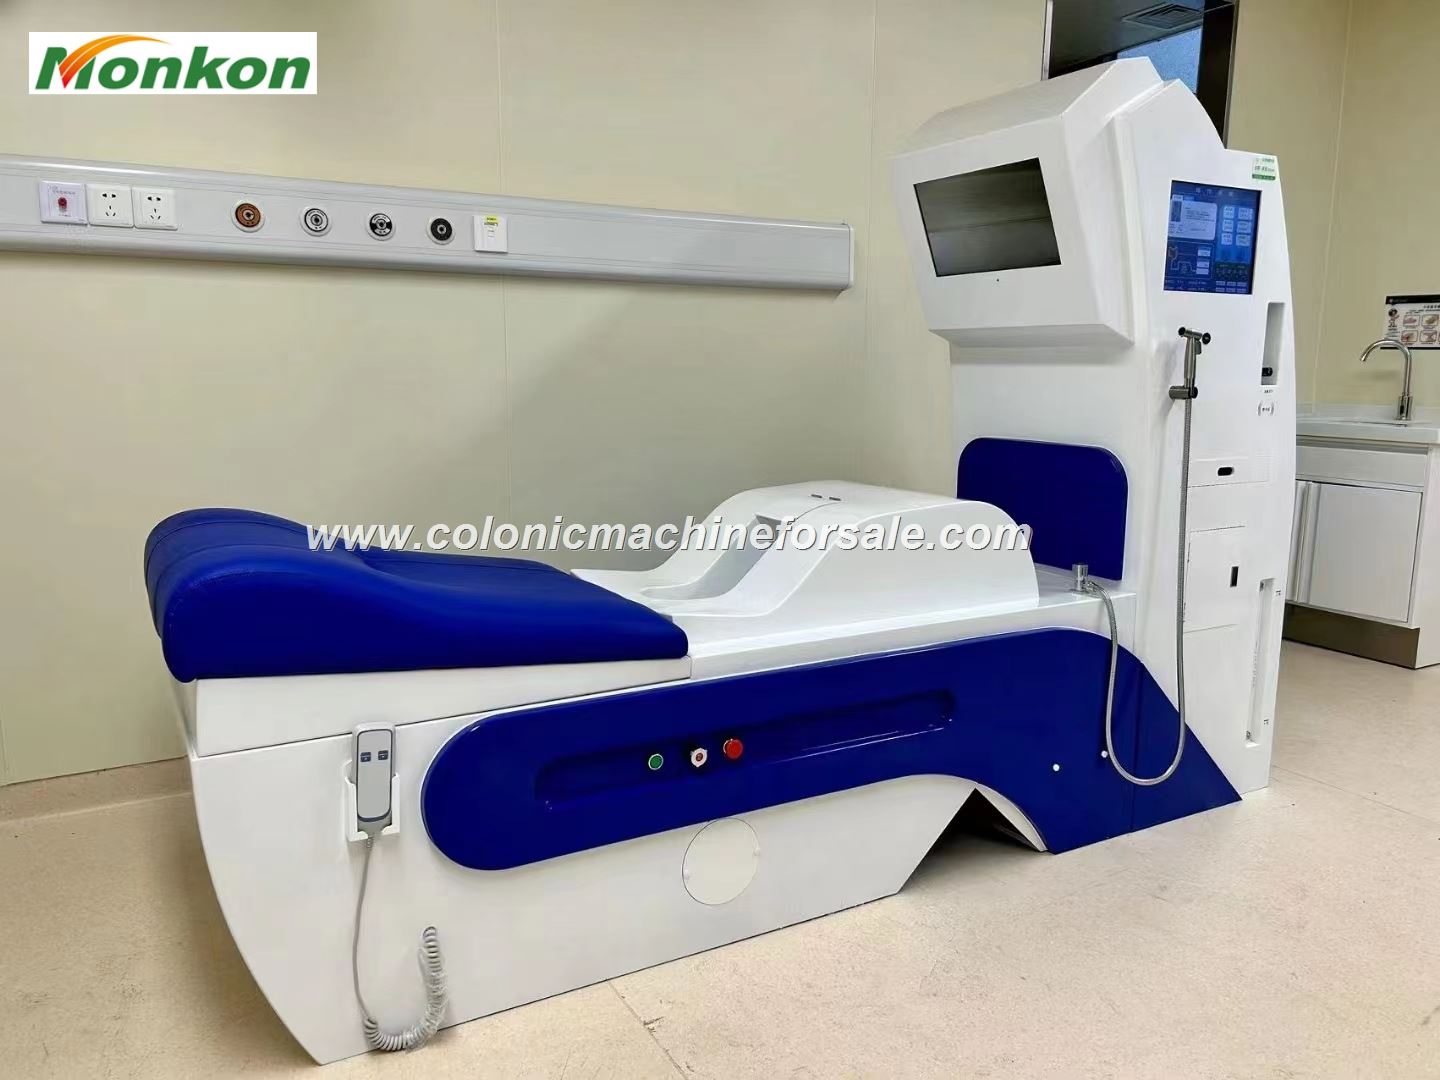  MAIKONG Colon cleansing machine price